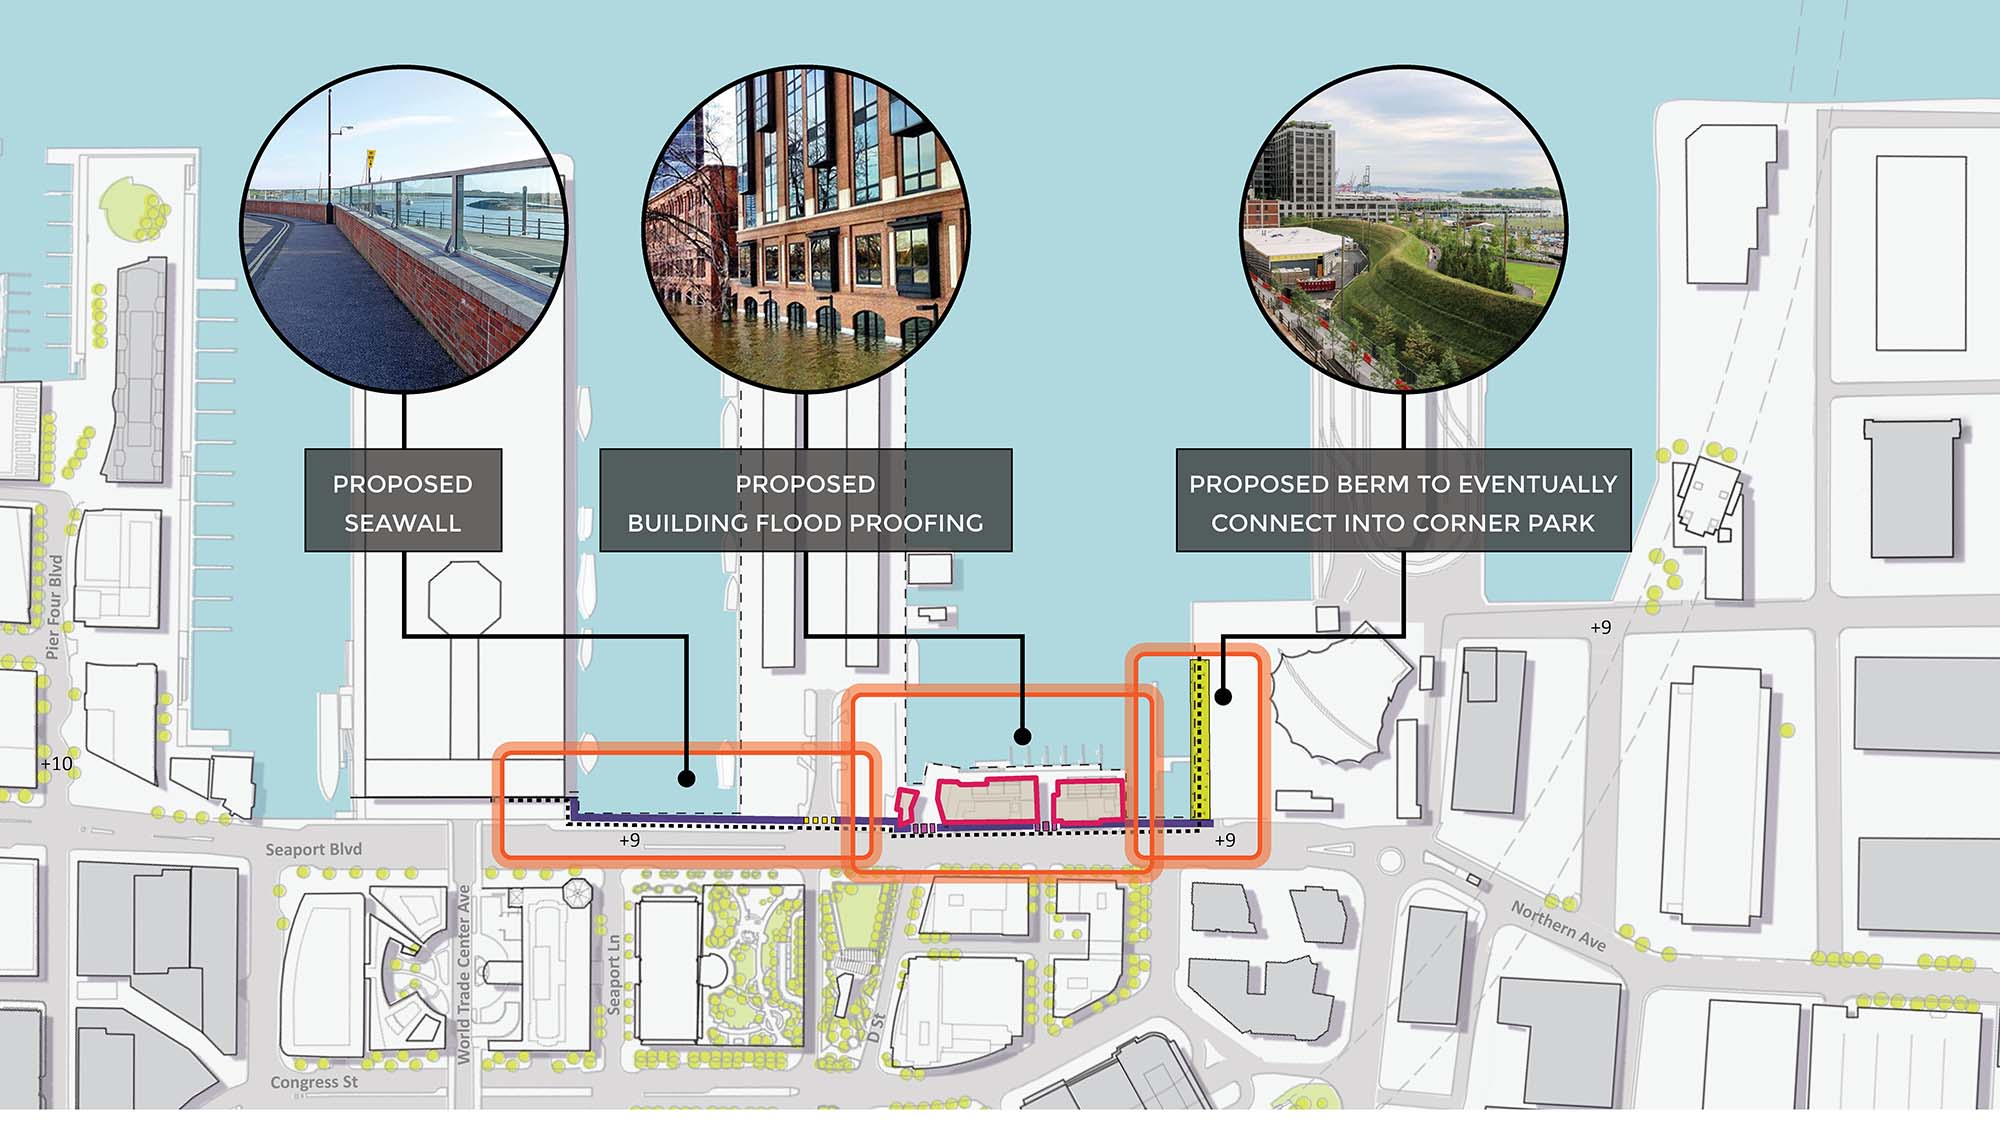 Image for proposed seawall, flood proofing, and berm along seaport blvd